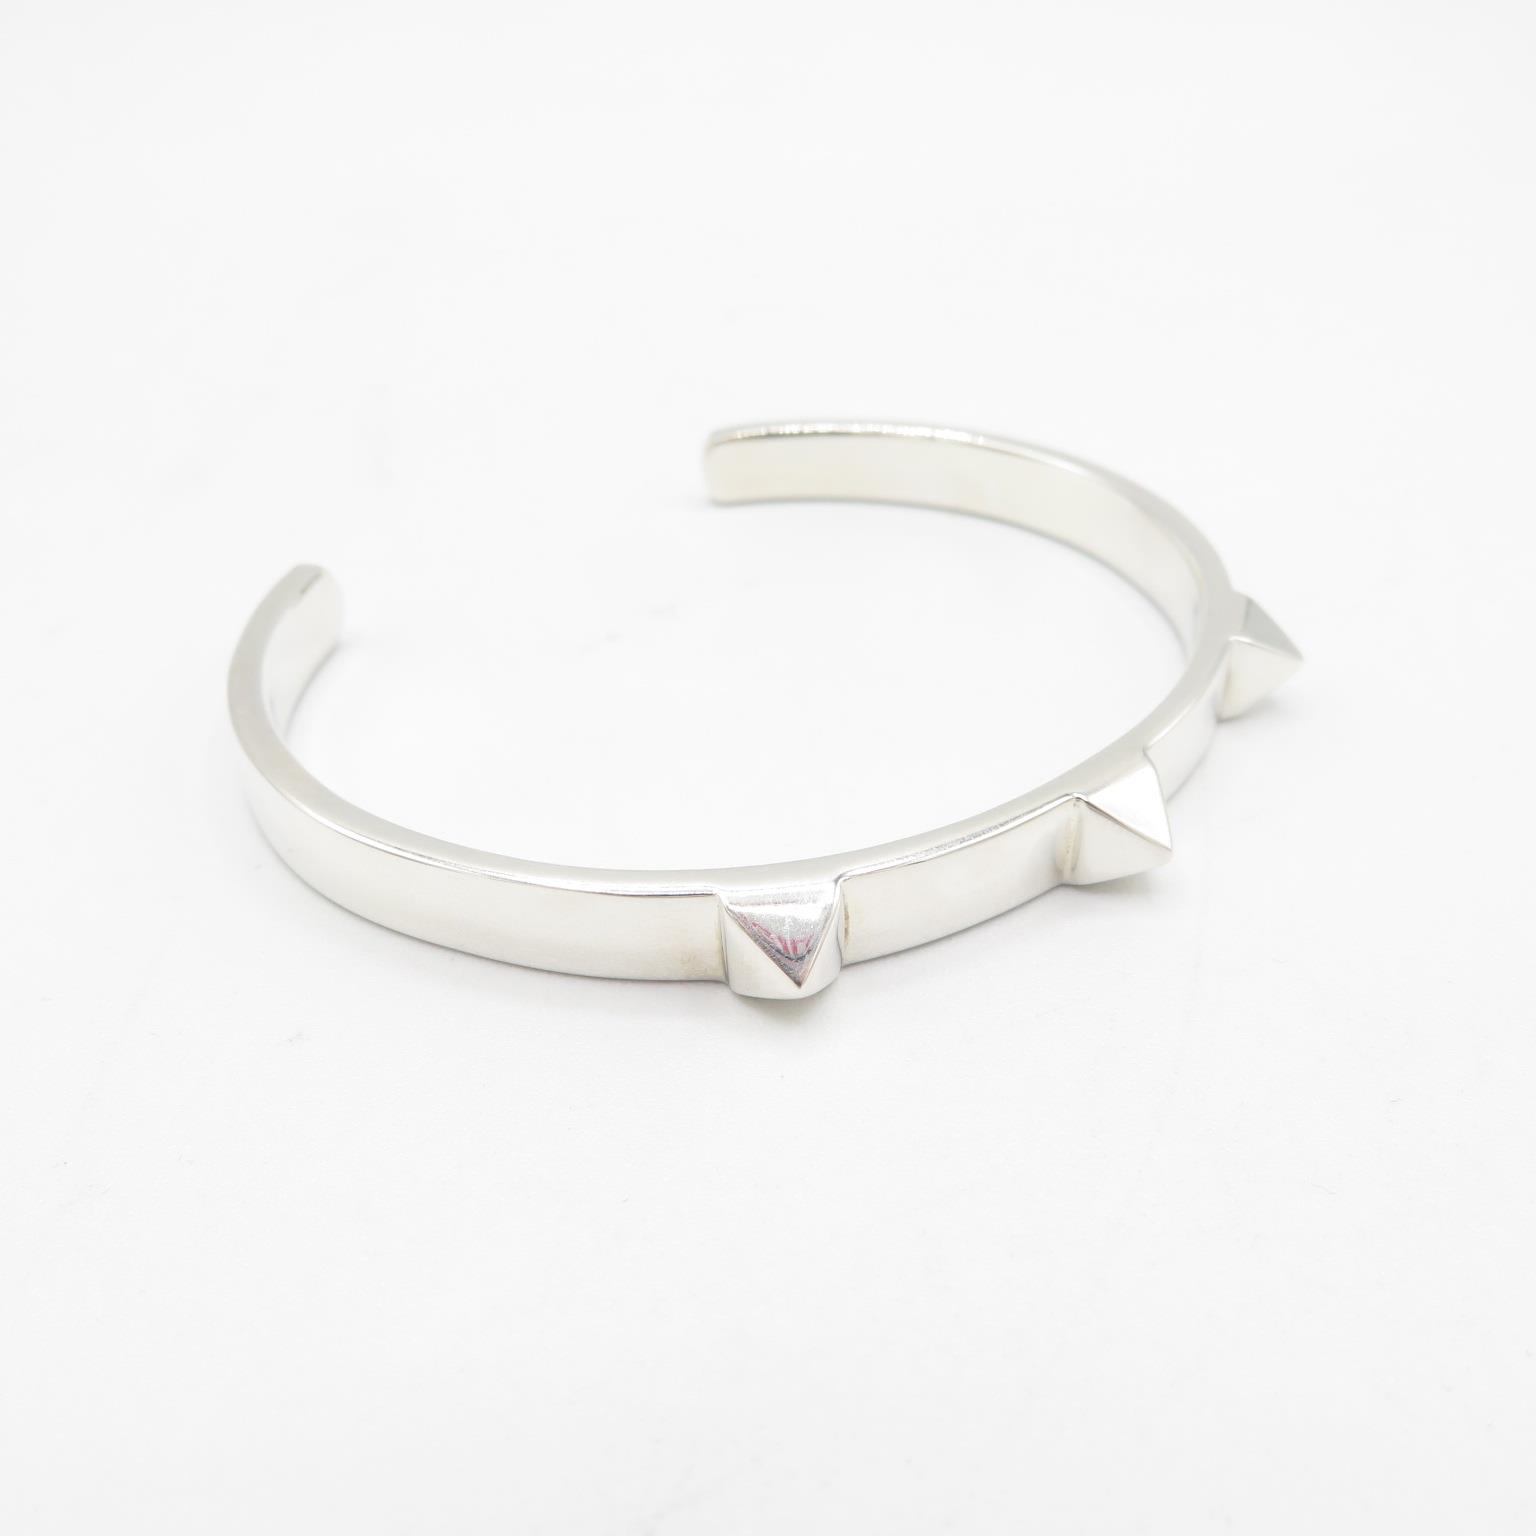 HM 925 Sterling Silver Brutalist Spikes bangle - adjustable - (27.3g) In excellent condition - Image 3 of 5